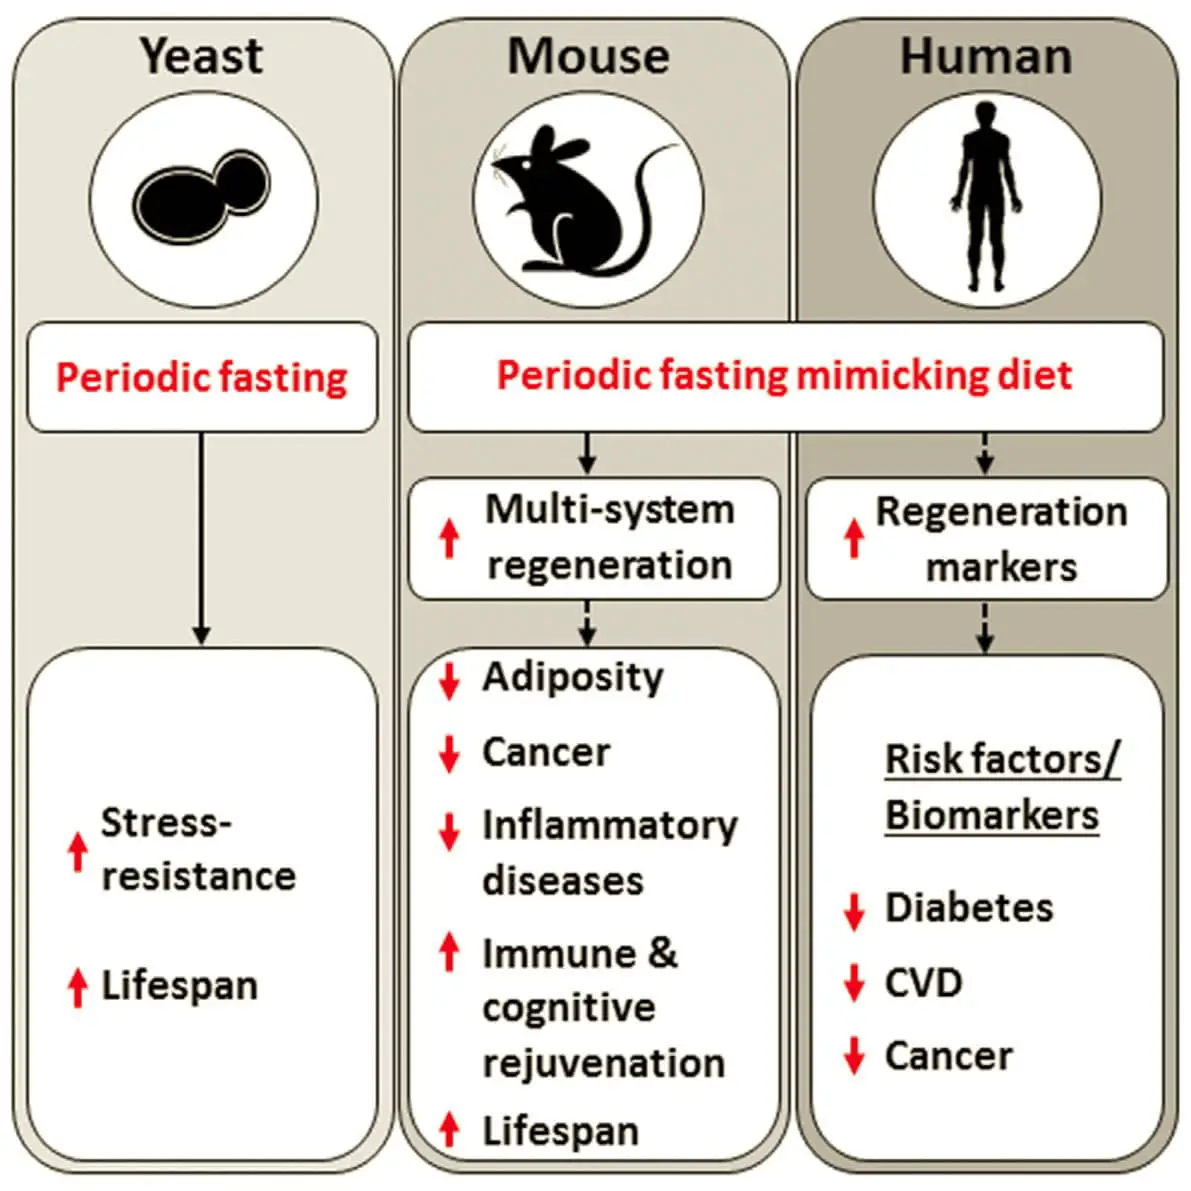 Diet that mimics fasting appears to slow aging